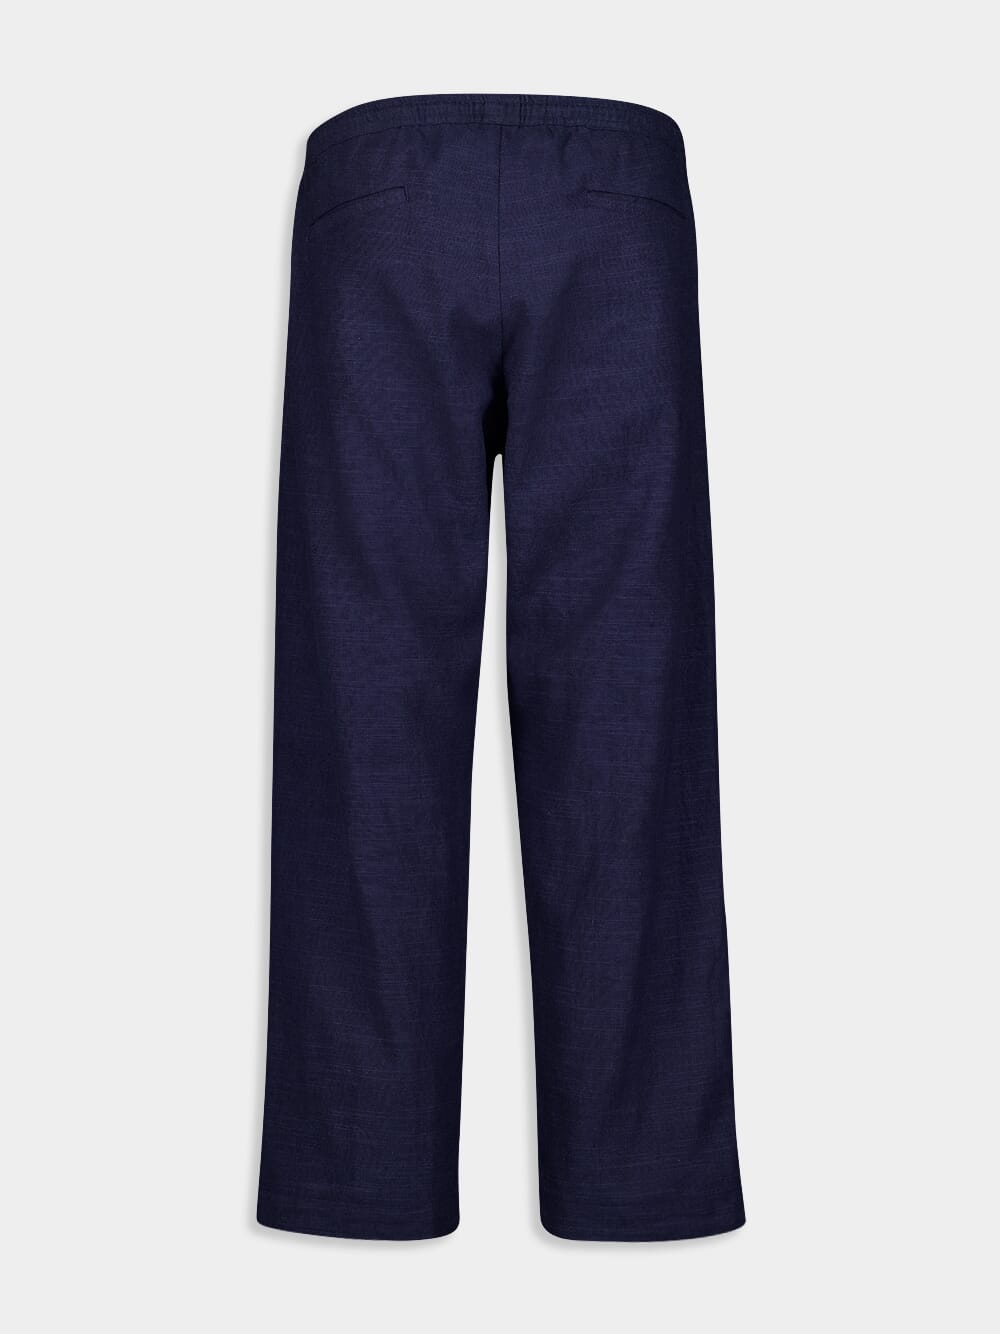 Embroidered Sesame Trousers